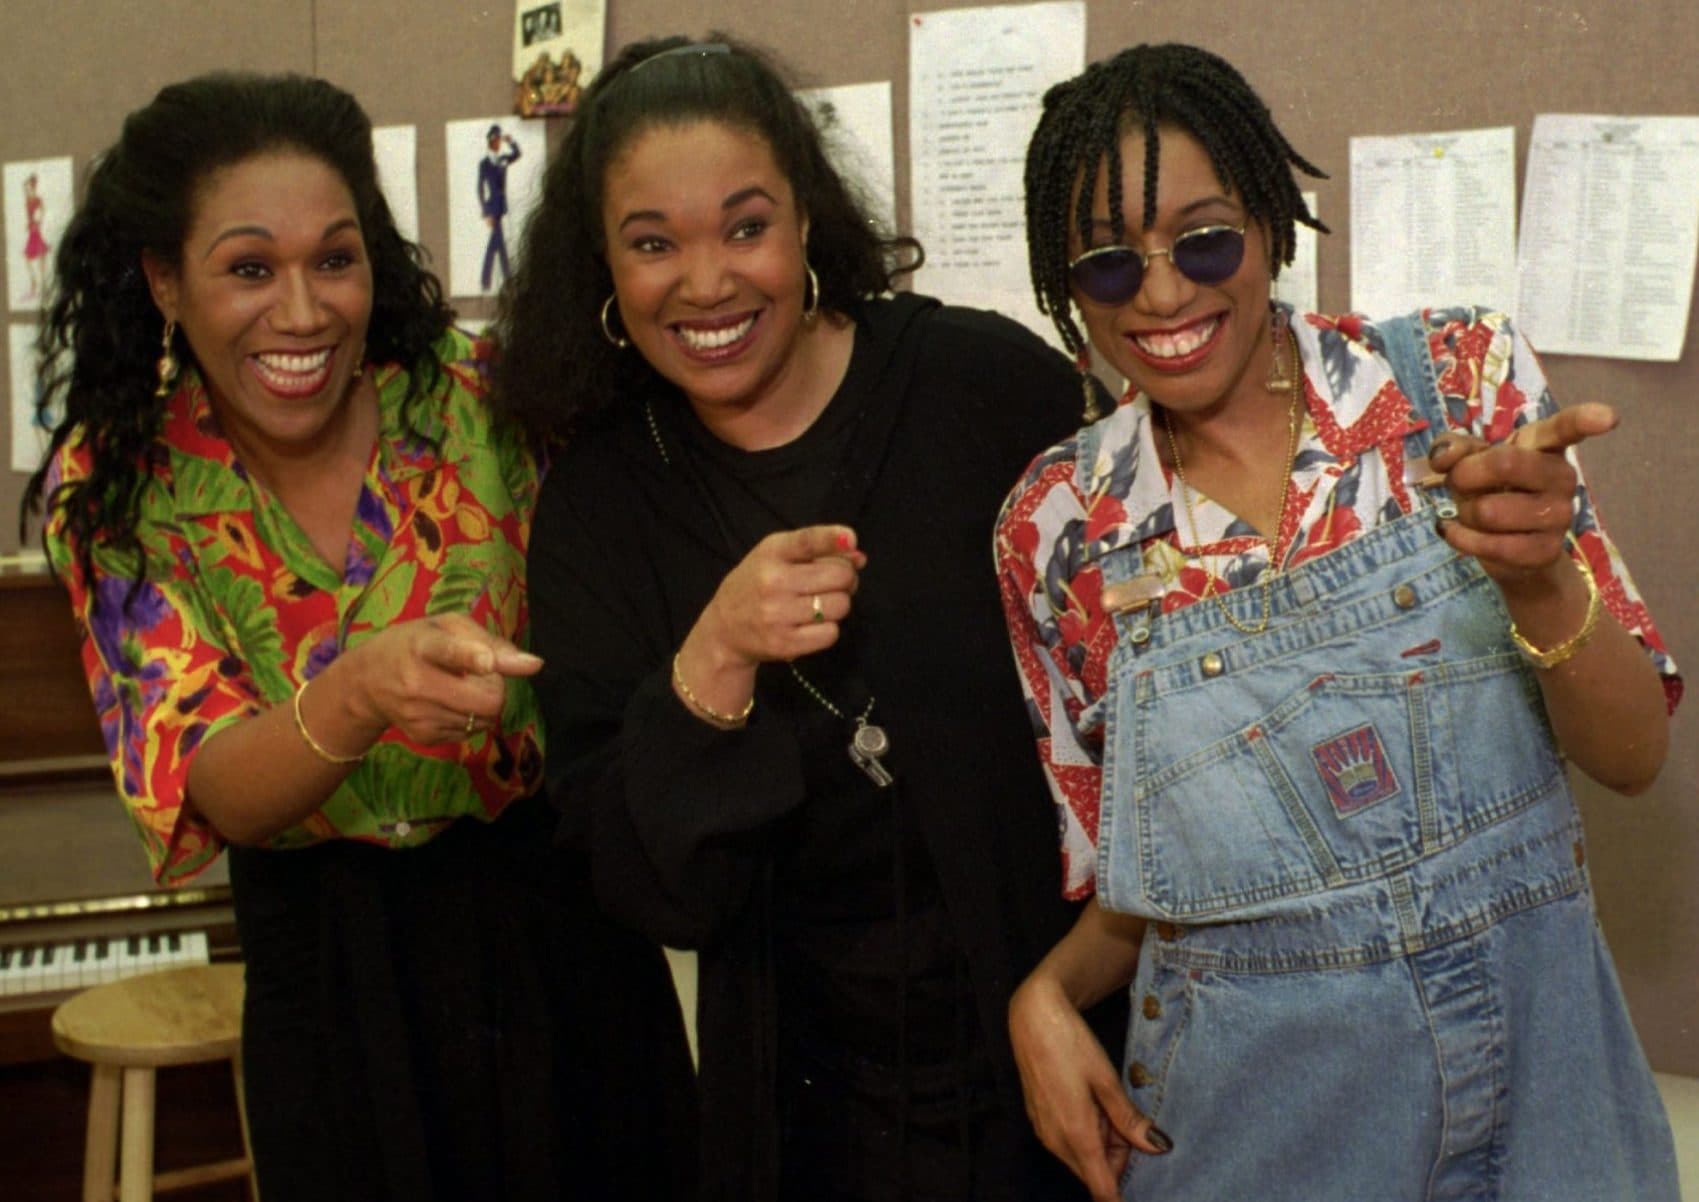 The Pointer Sisters pose in New York on Aug. 24, 1995. From the left, Ruth, Anita and (now deceased) June. (Marty Reichenthal/AP)